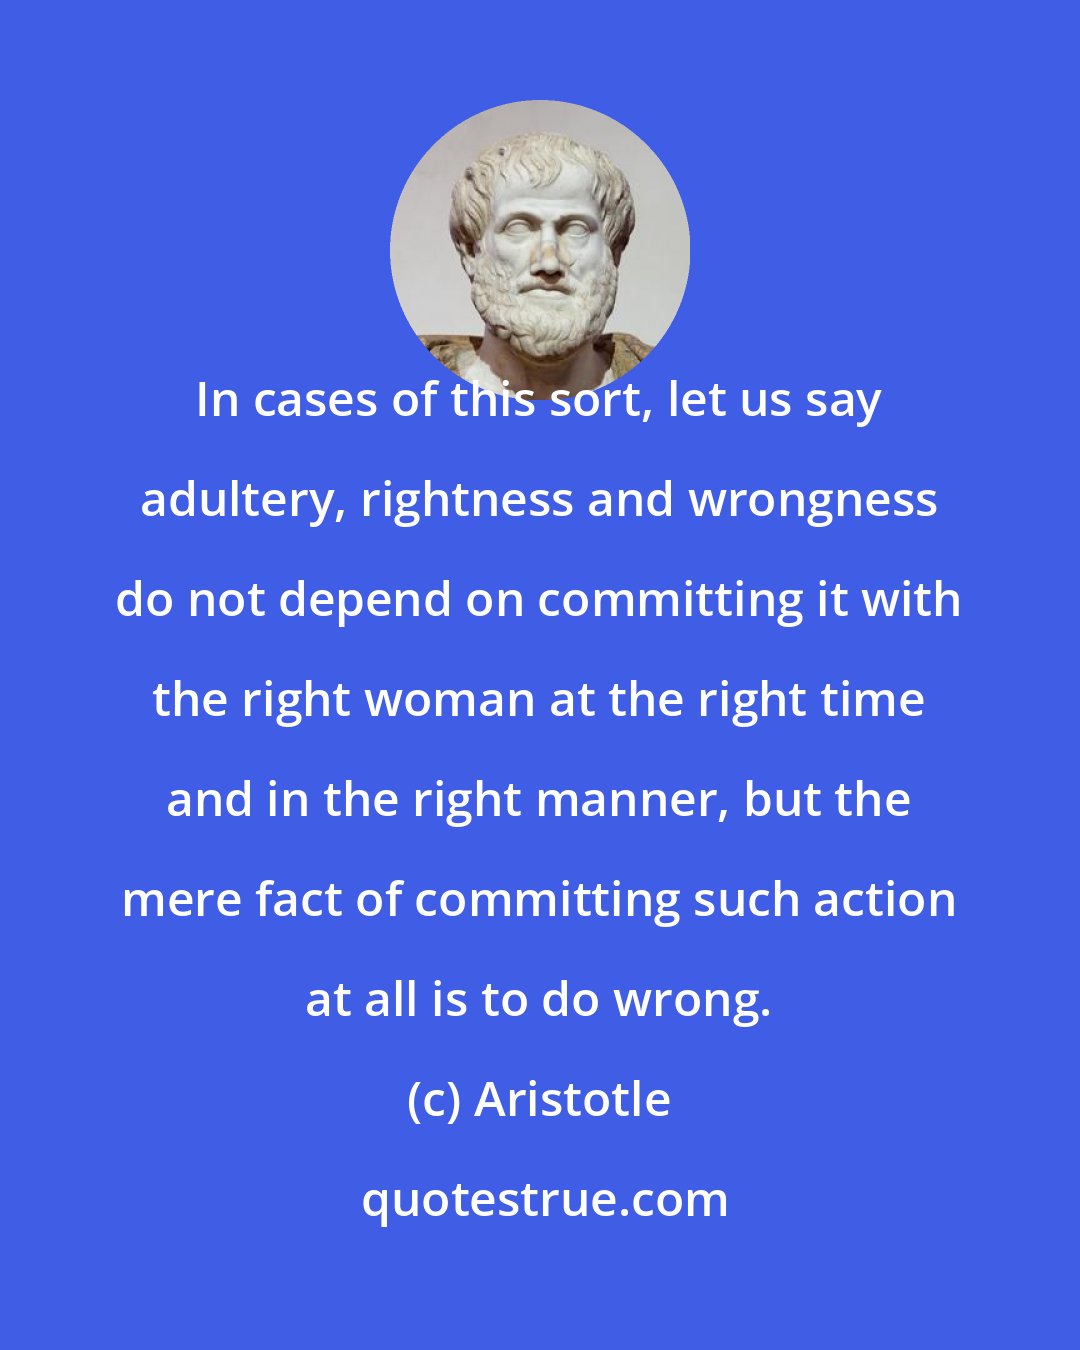 Aristotle: In cases of this sort, let us say adultery, rightness and wrongness do not depend on committing it with the right woman at the right time and in the right manner, but the mere fact of committing such action at all is to do wrong.